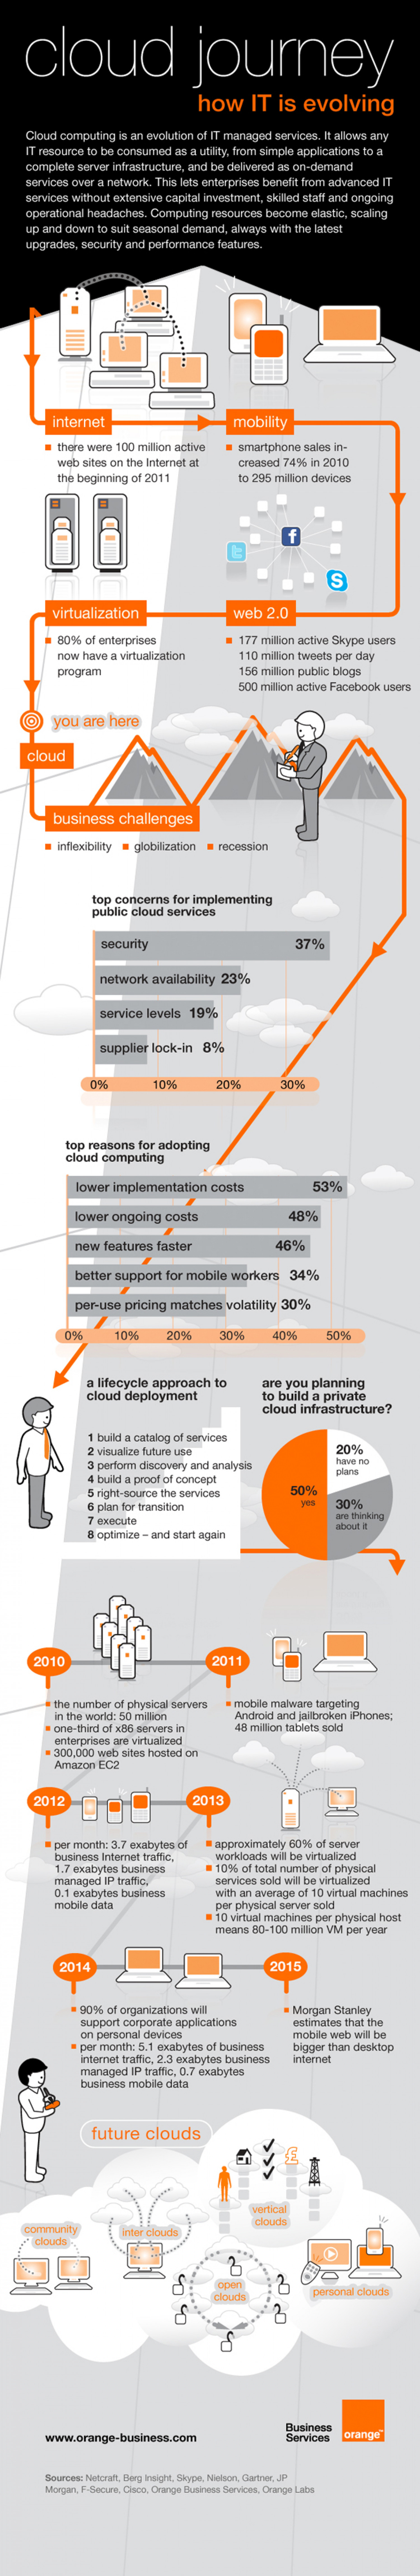 Cloud Journey: how IT is evolving Infographic